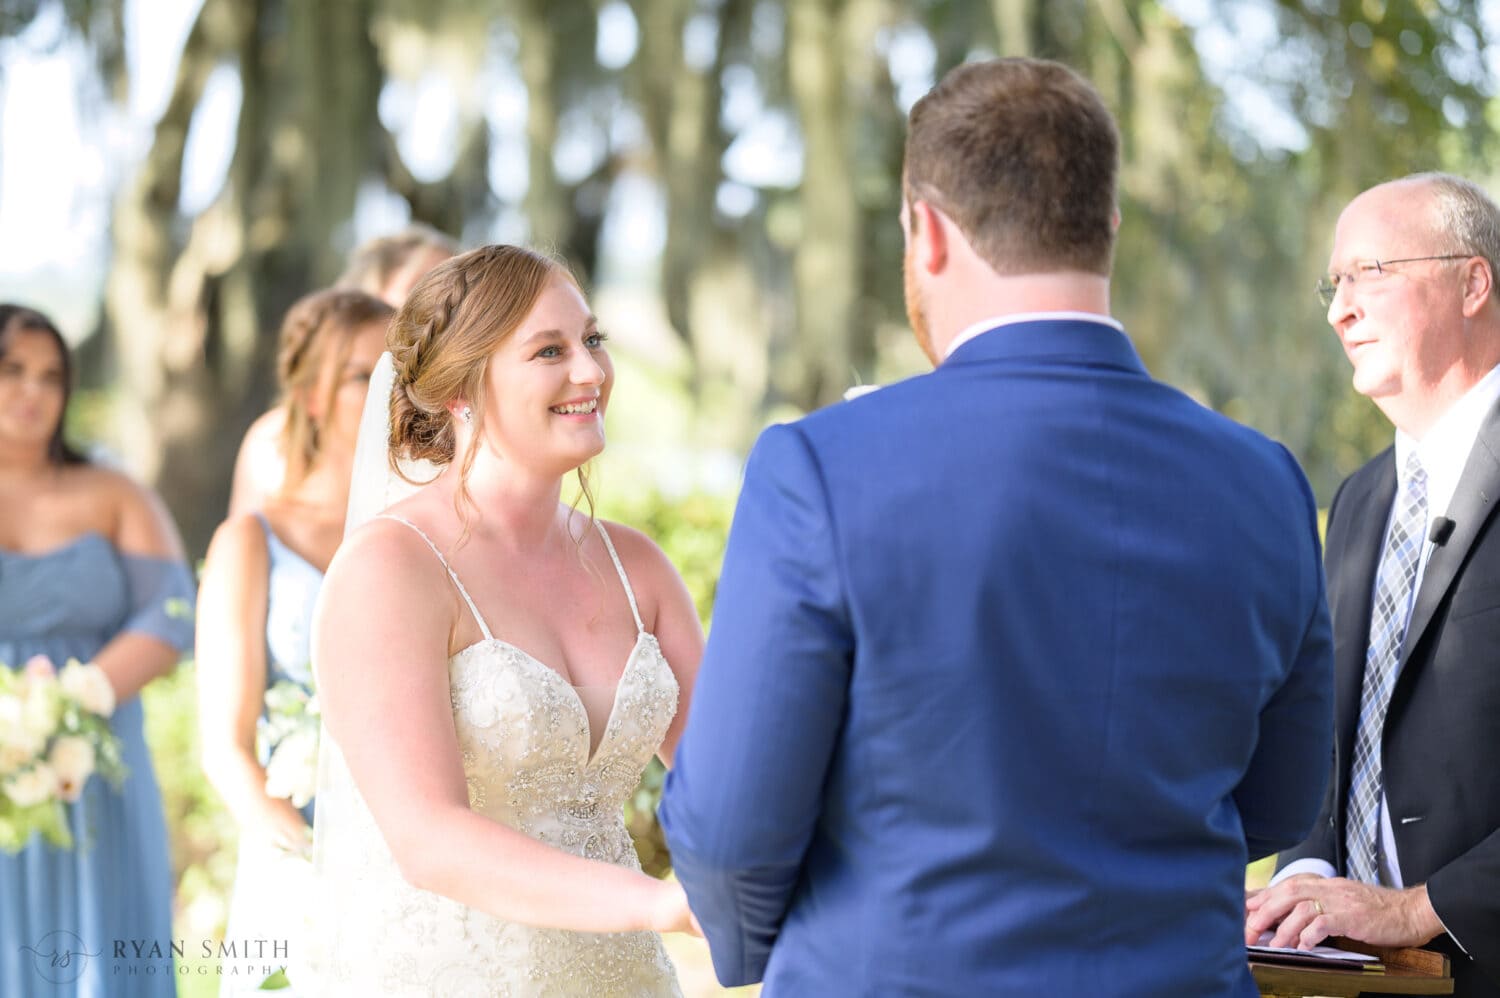 Bride smiling at the groom during ceremony - Magnolia Plantation